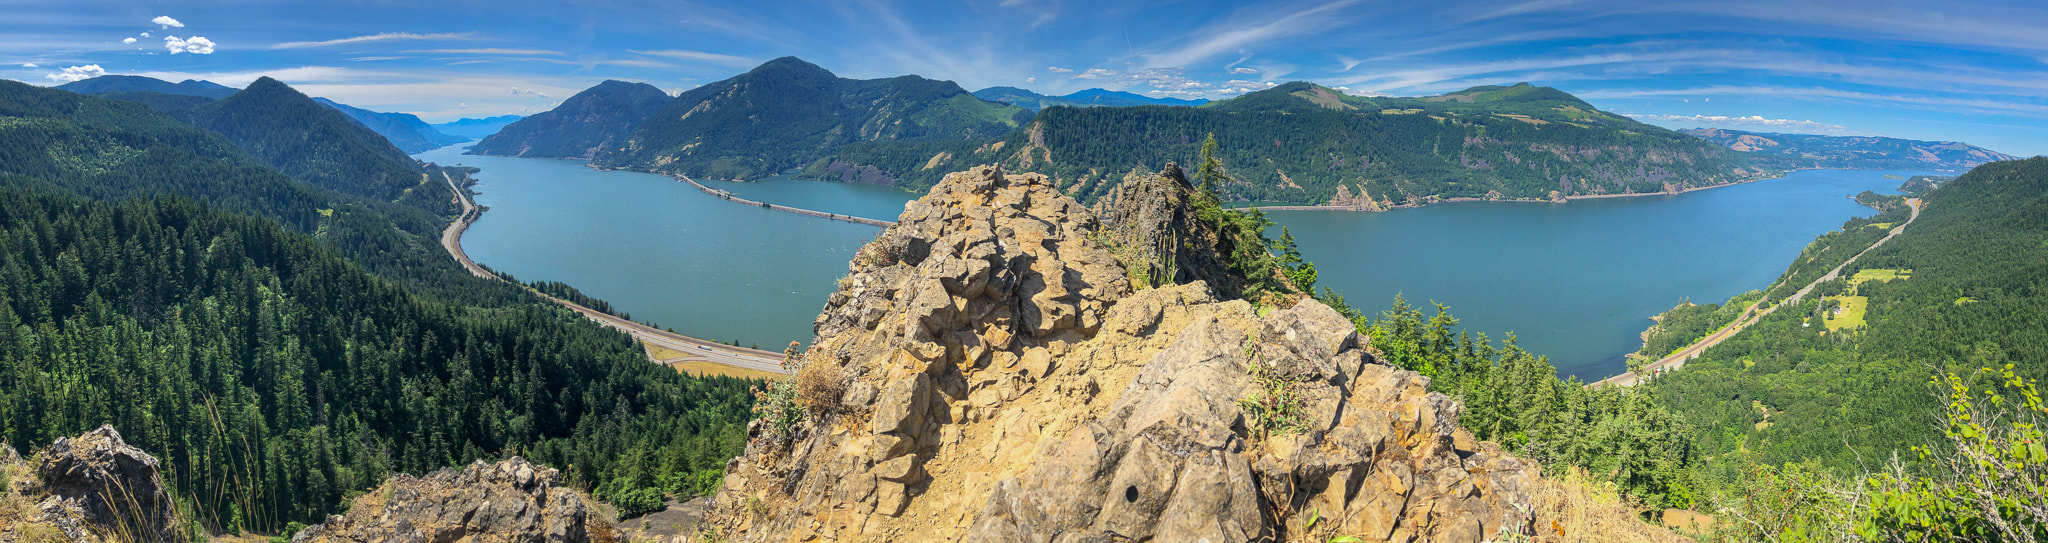 Mitchell Point viewpoint panorama